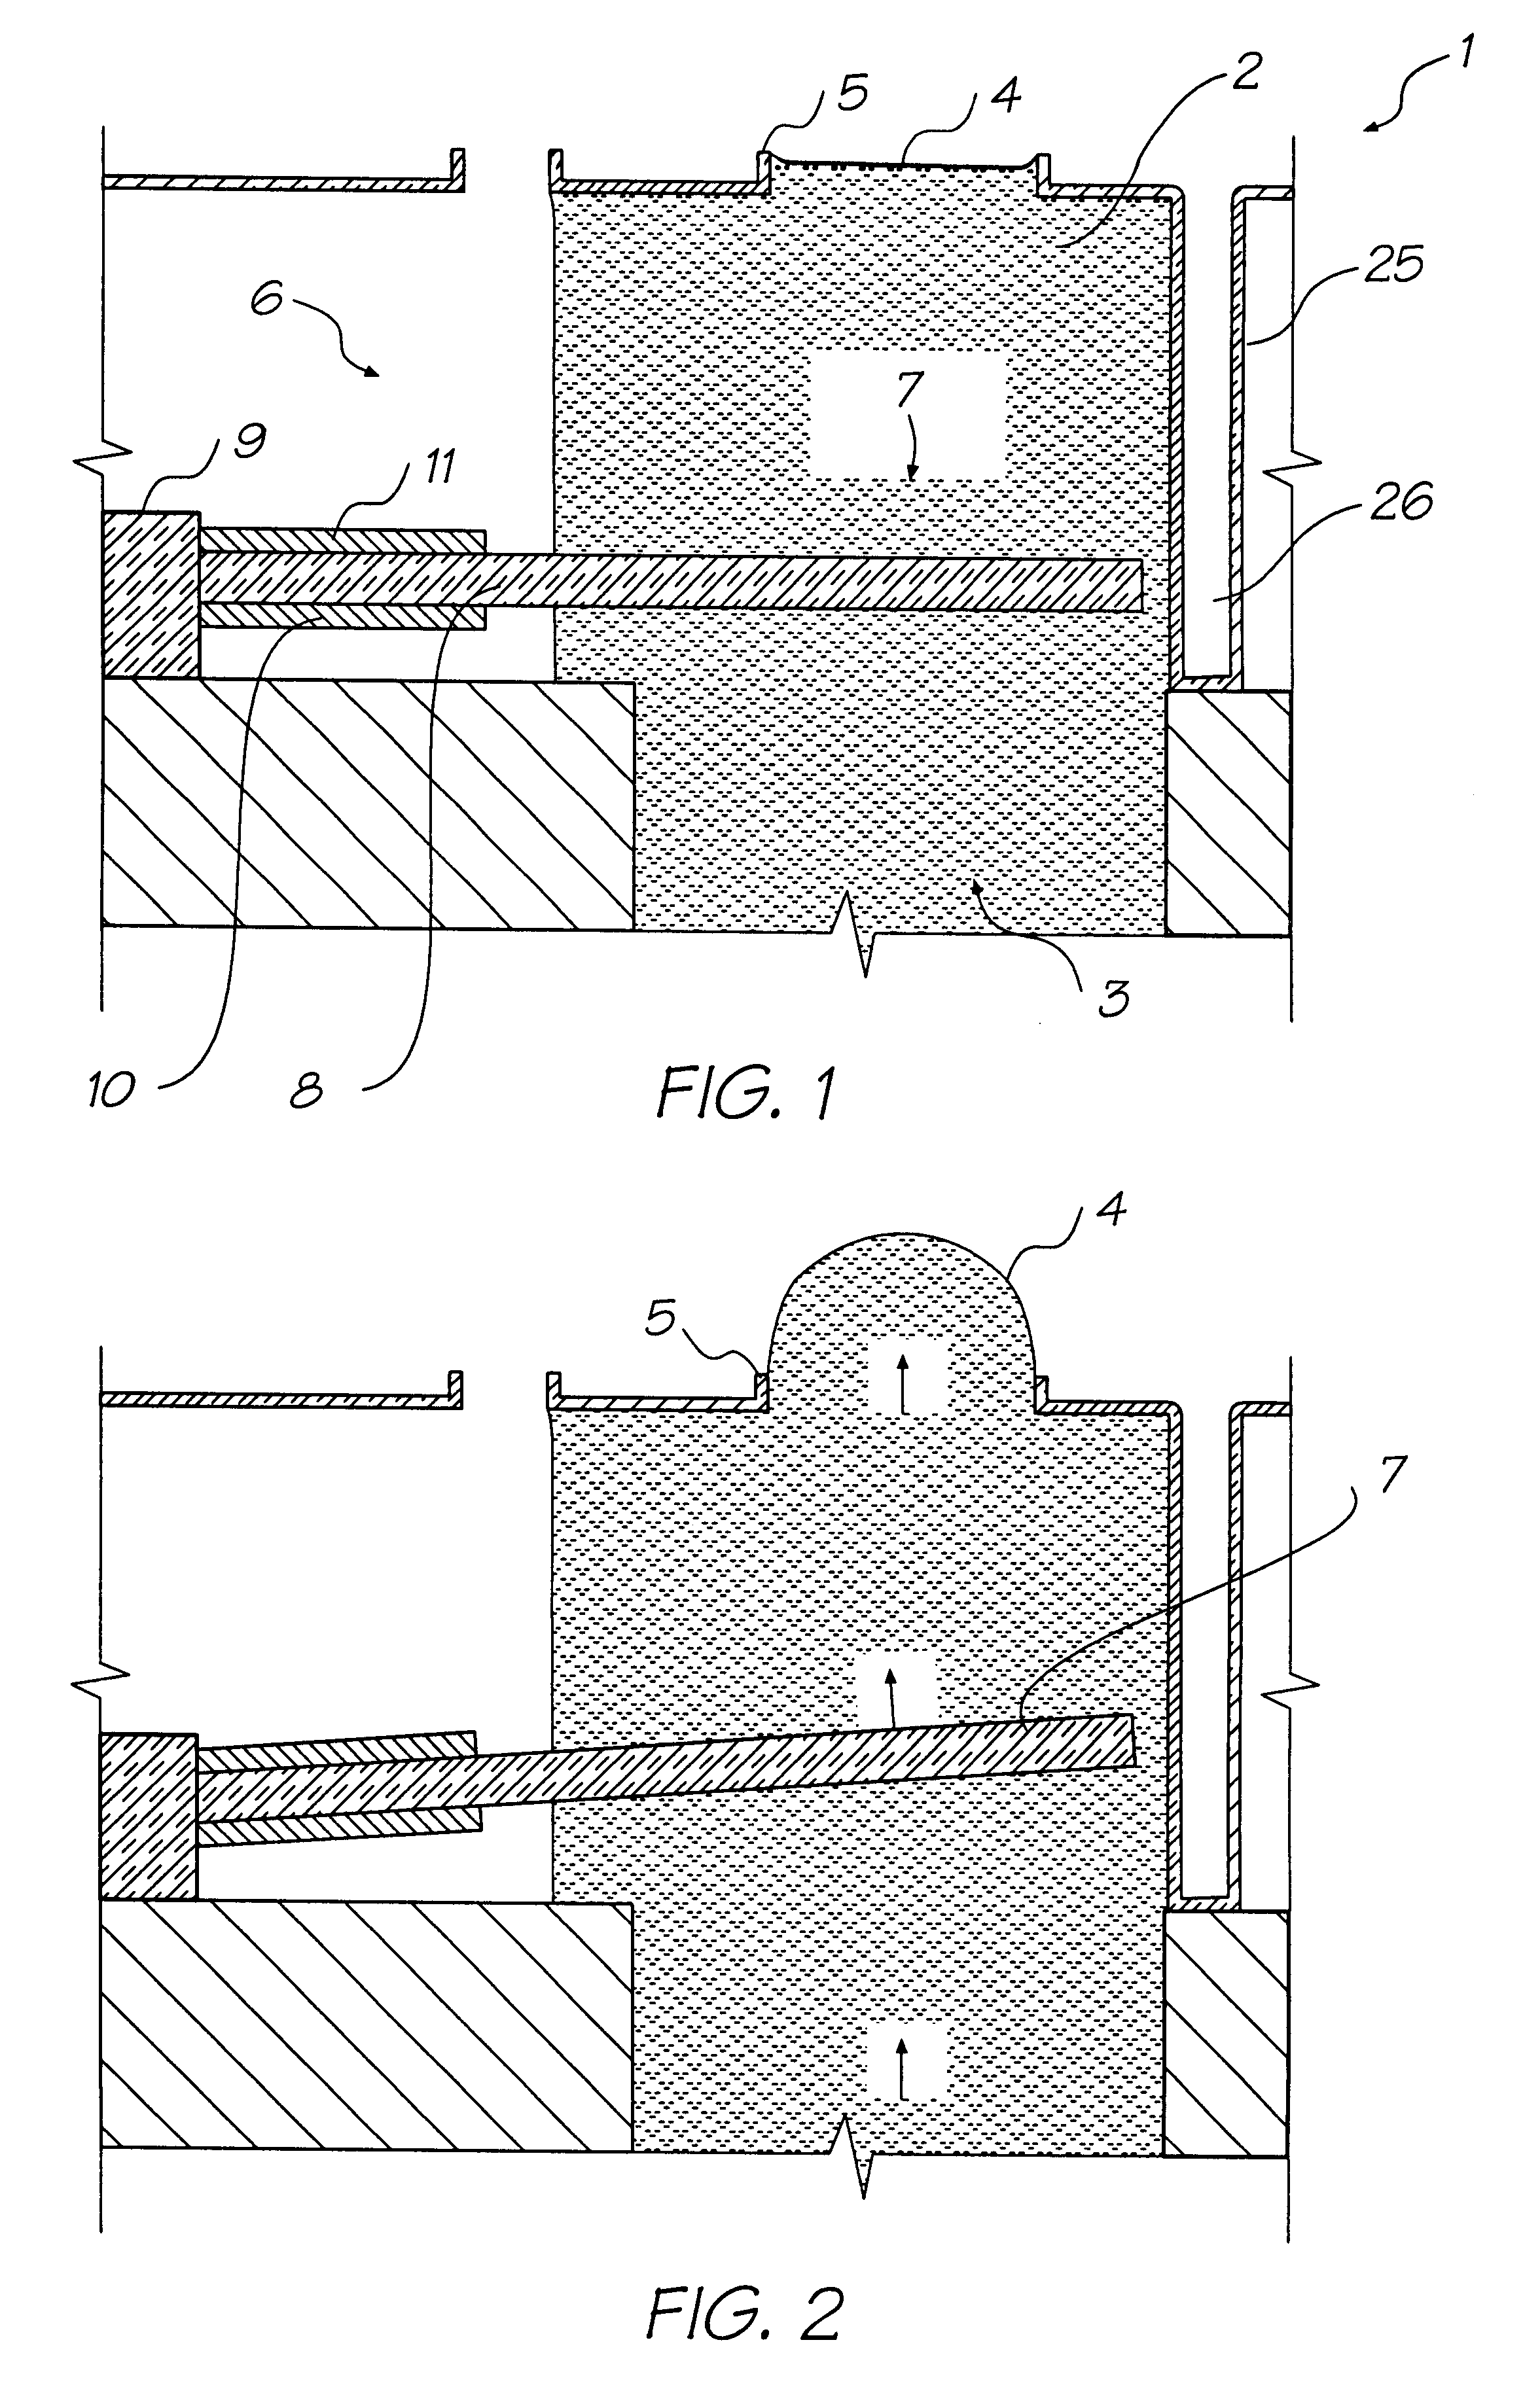 Method of interconnecting a printhead with an ink supply manifold and a combined structure resulting therefrom